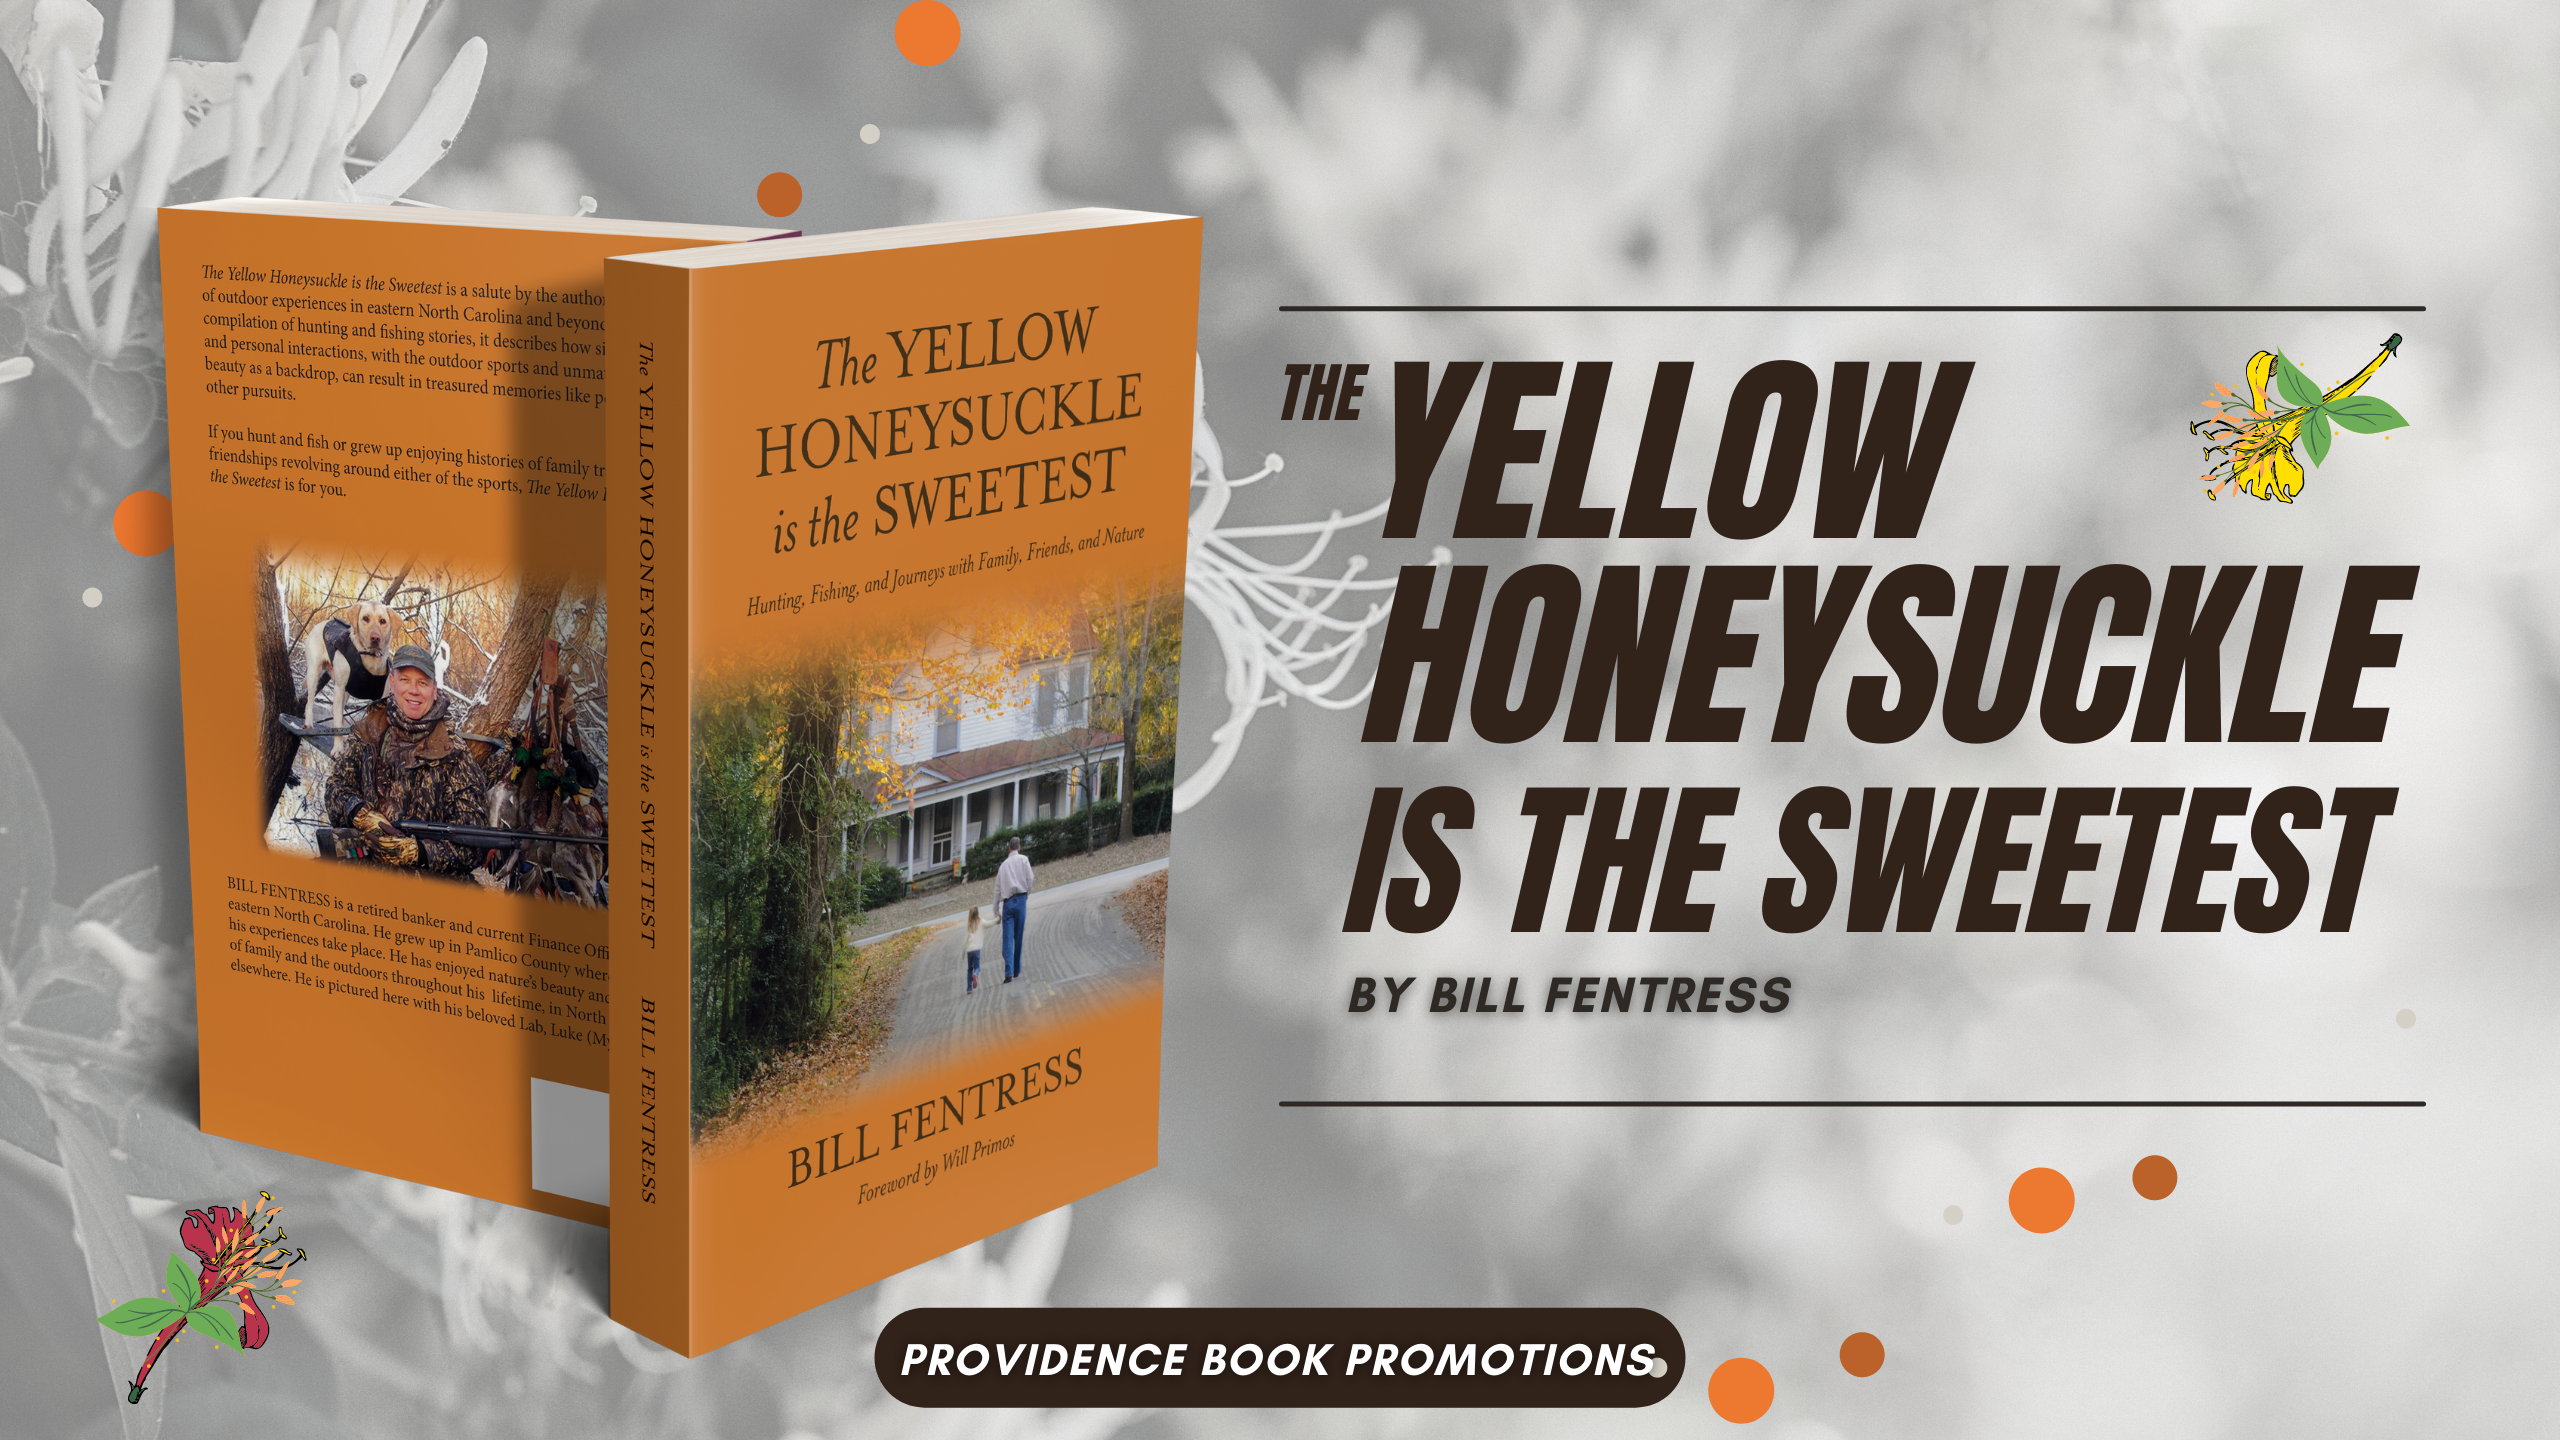 The Yellow Honeysuckle is the Sweetest by Bill Fentress